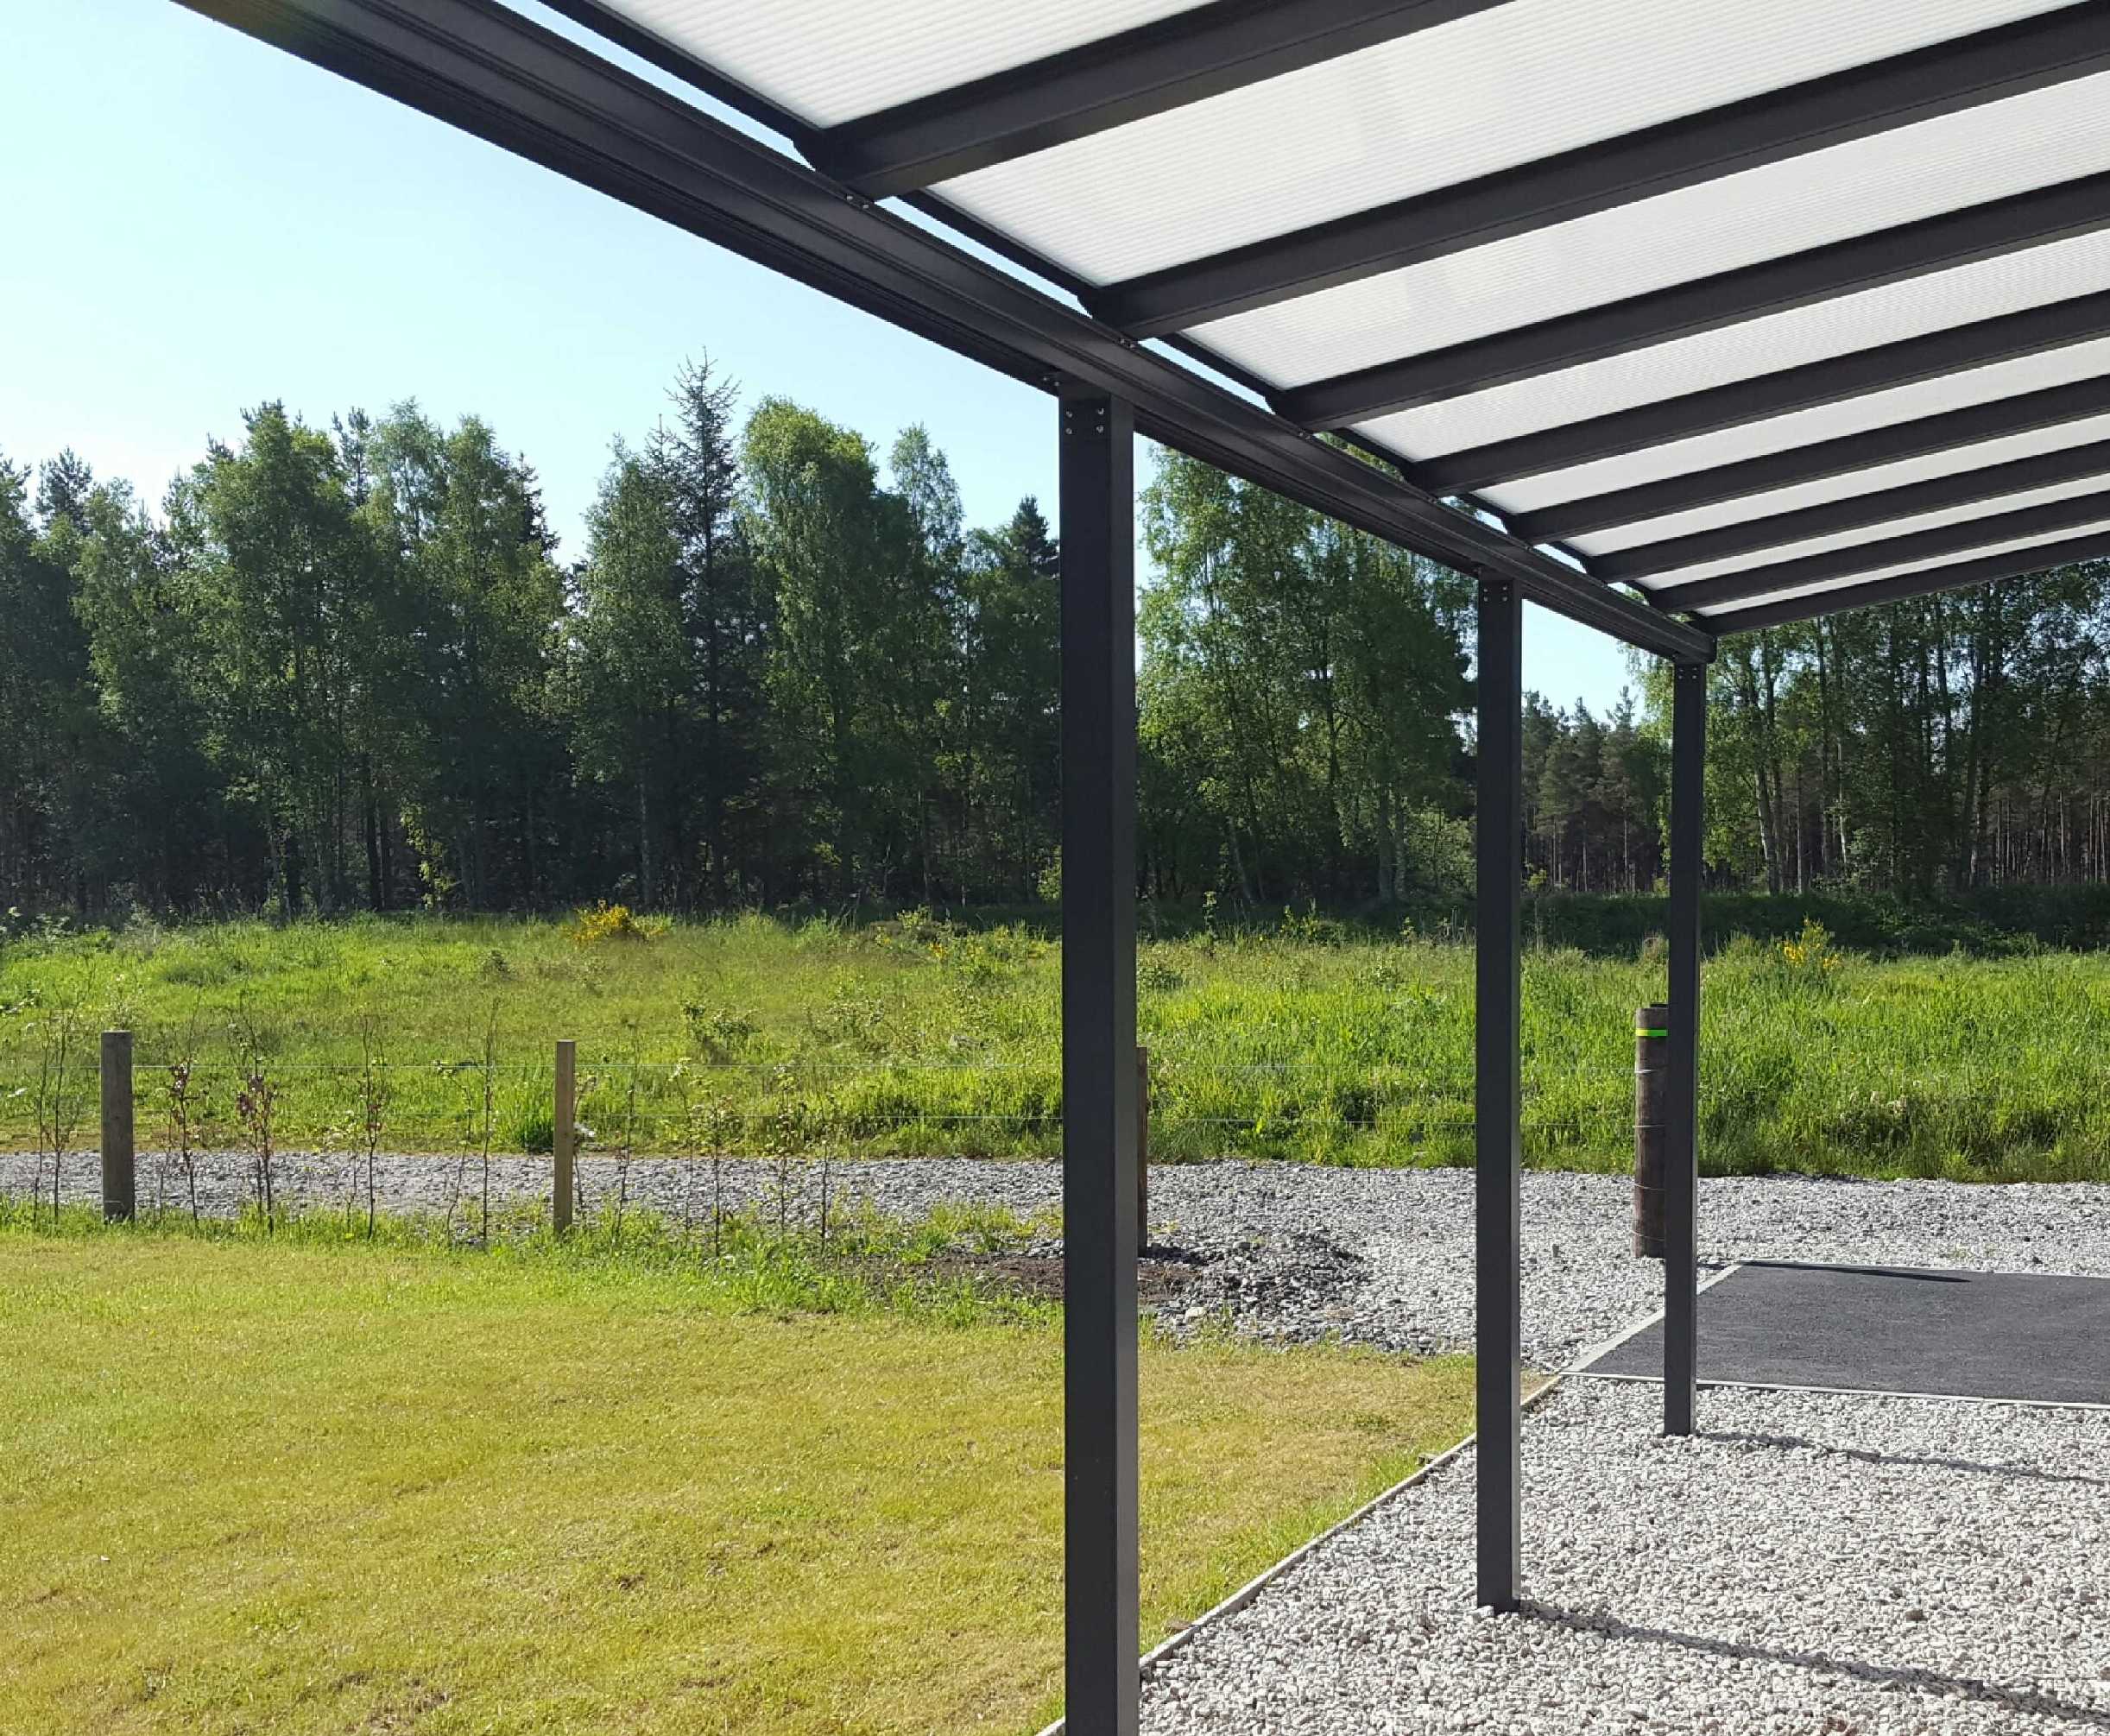 SPECIAL OFFER Omega Smart Lean-To Canopy, Anthracite Grey, 16mm Polycarbonate Glazing - 3.1m (W) x 1.5m (P), (2) Supporting Posts